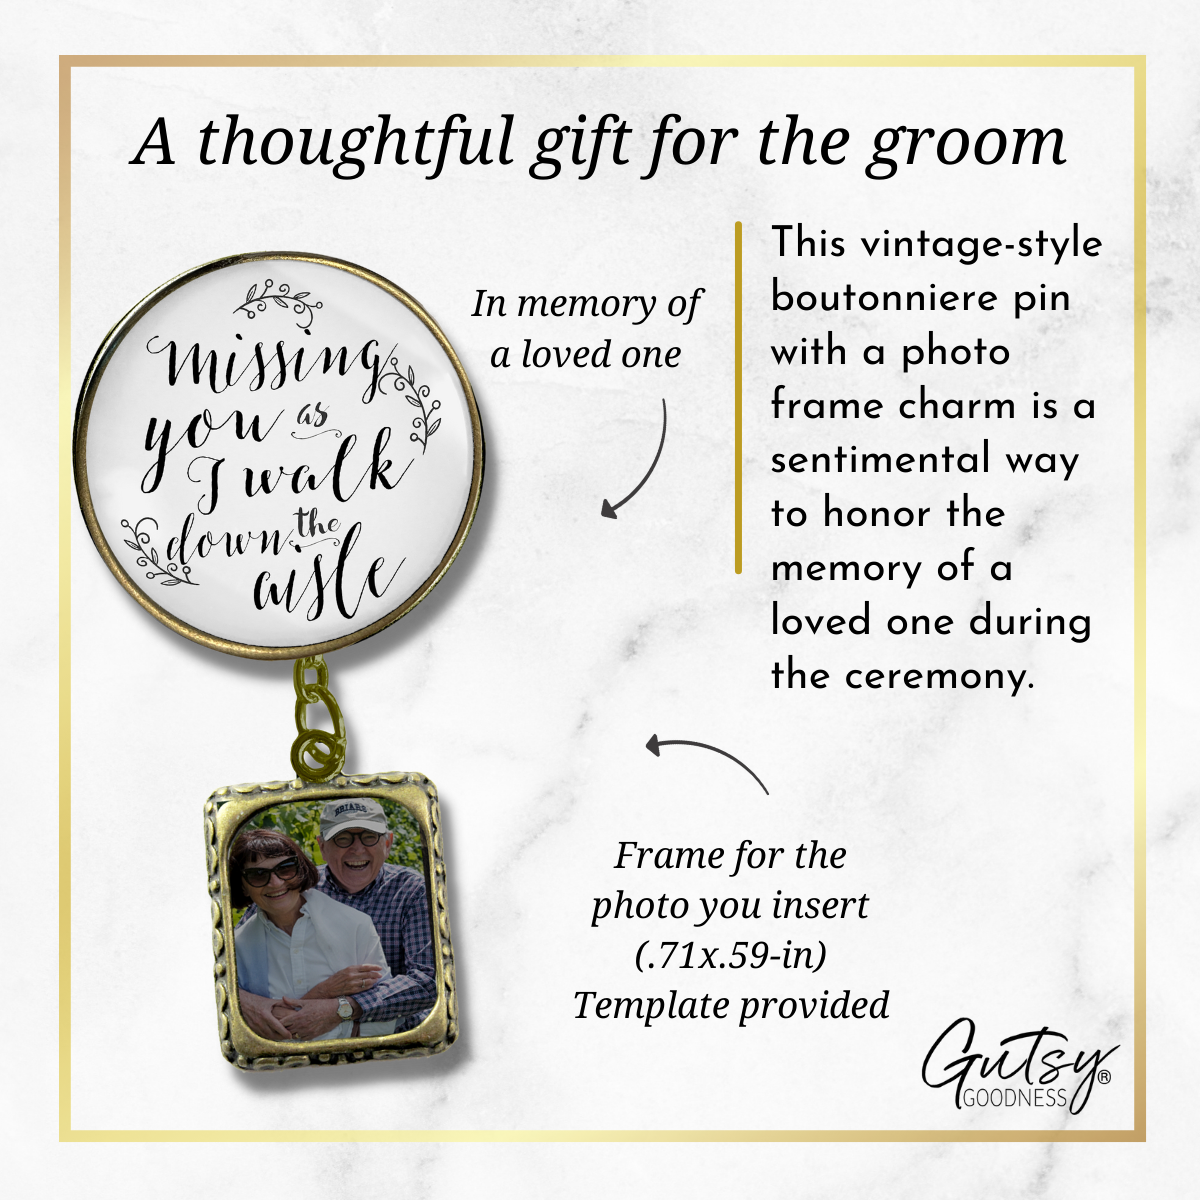 Wedding Memorial Boutonniere Pin Photo Frame Missing You Today Vintage White For Men - Gutsy Goodness